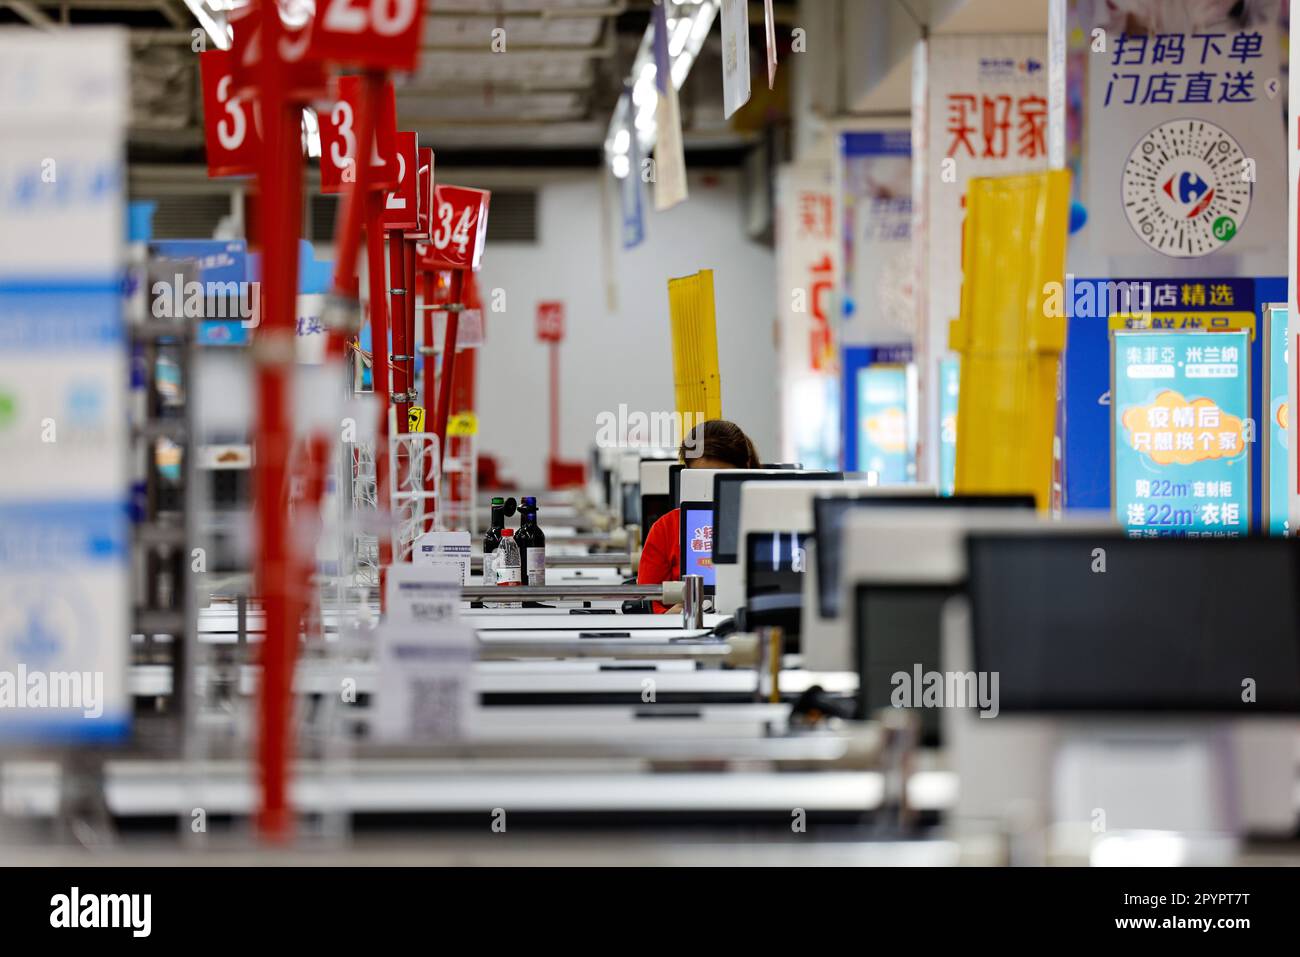 A view of a retail store with numerous checkout counters arranged in neat rows Stock Photo